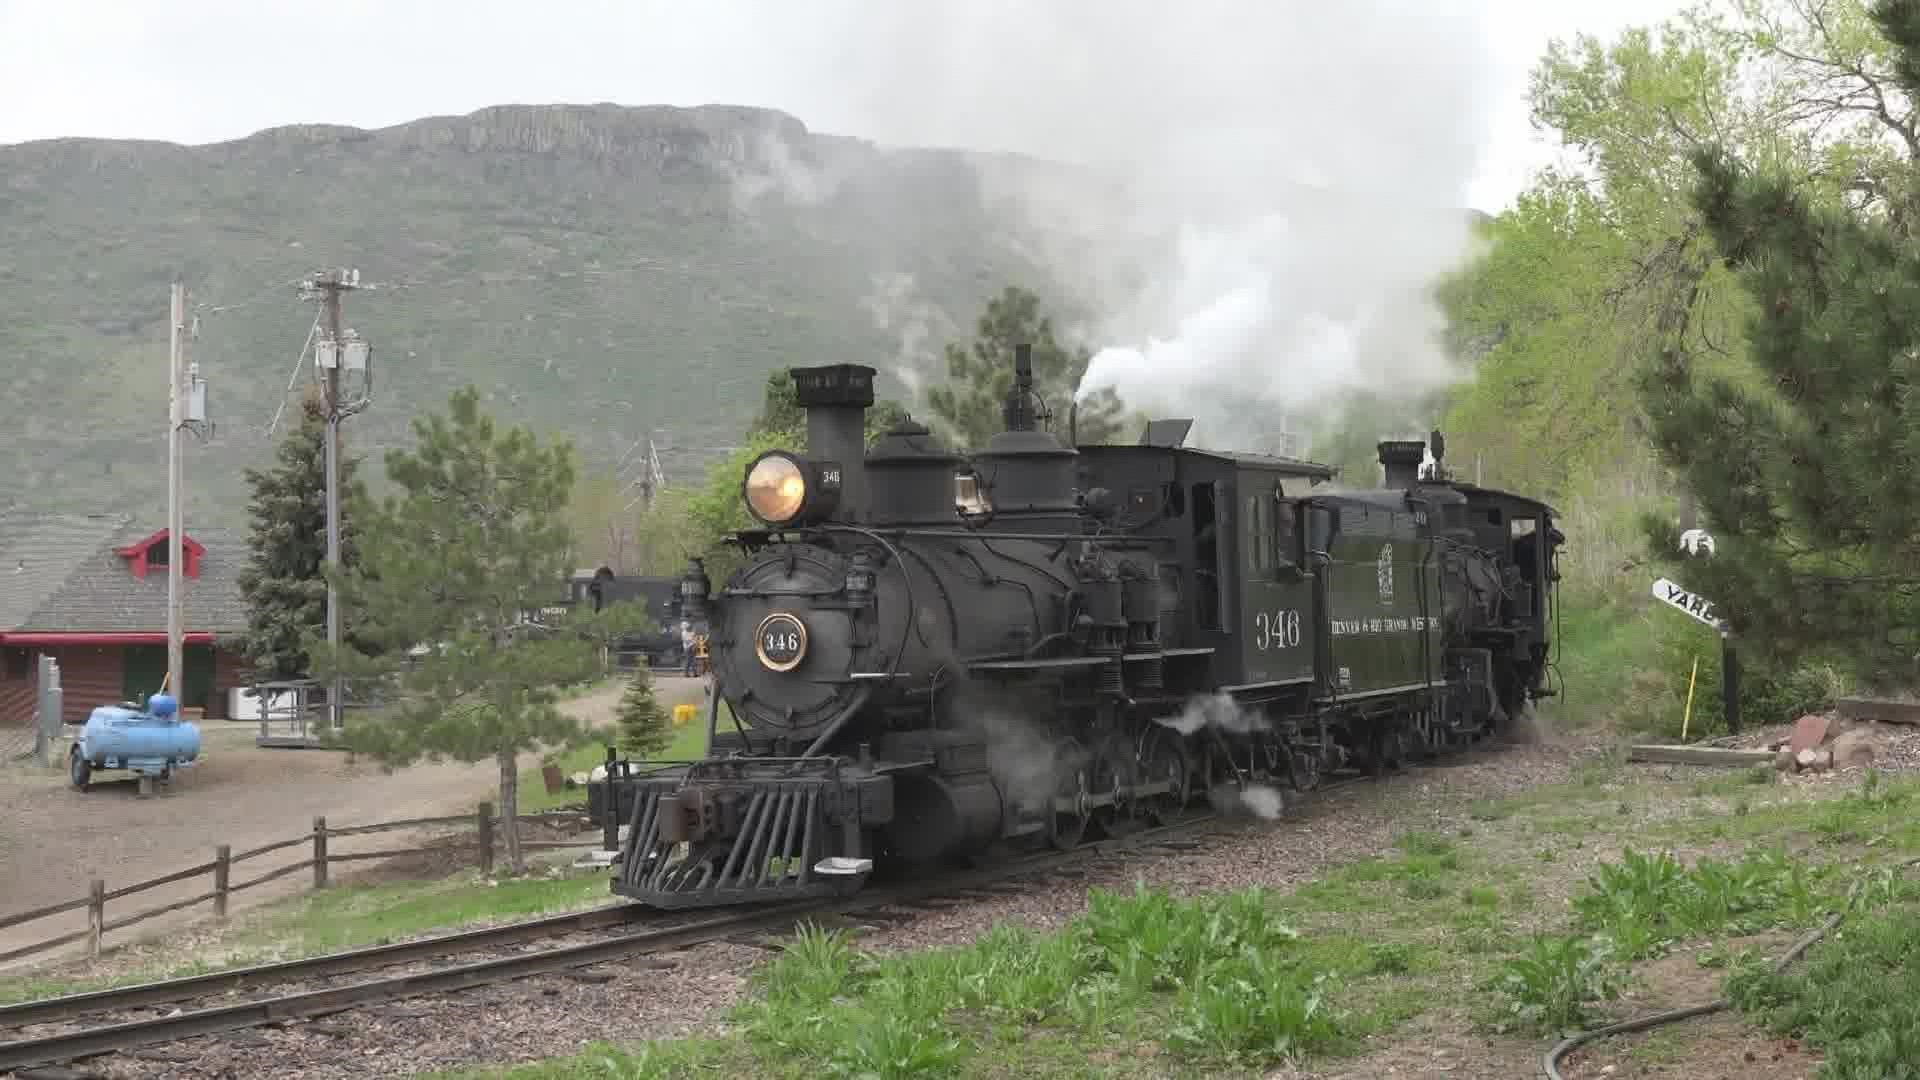 This May the Colorado Railroad Museum is "on track" with all kinds of family and rail-fan fun, special events and expanded hours and train rides.